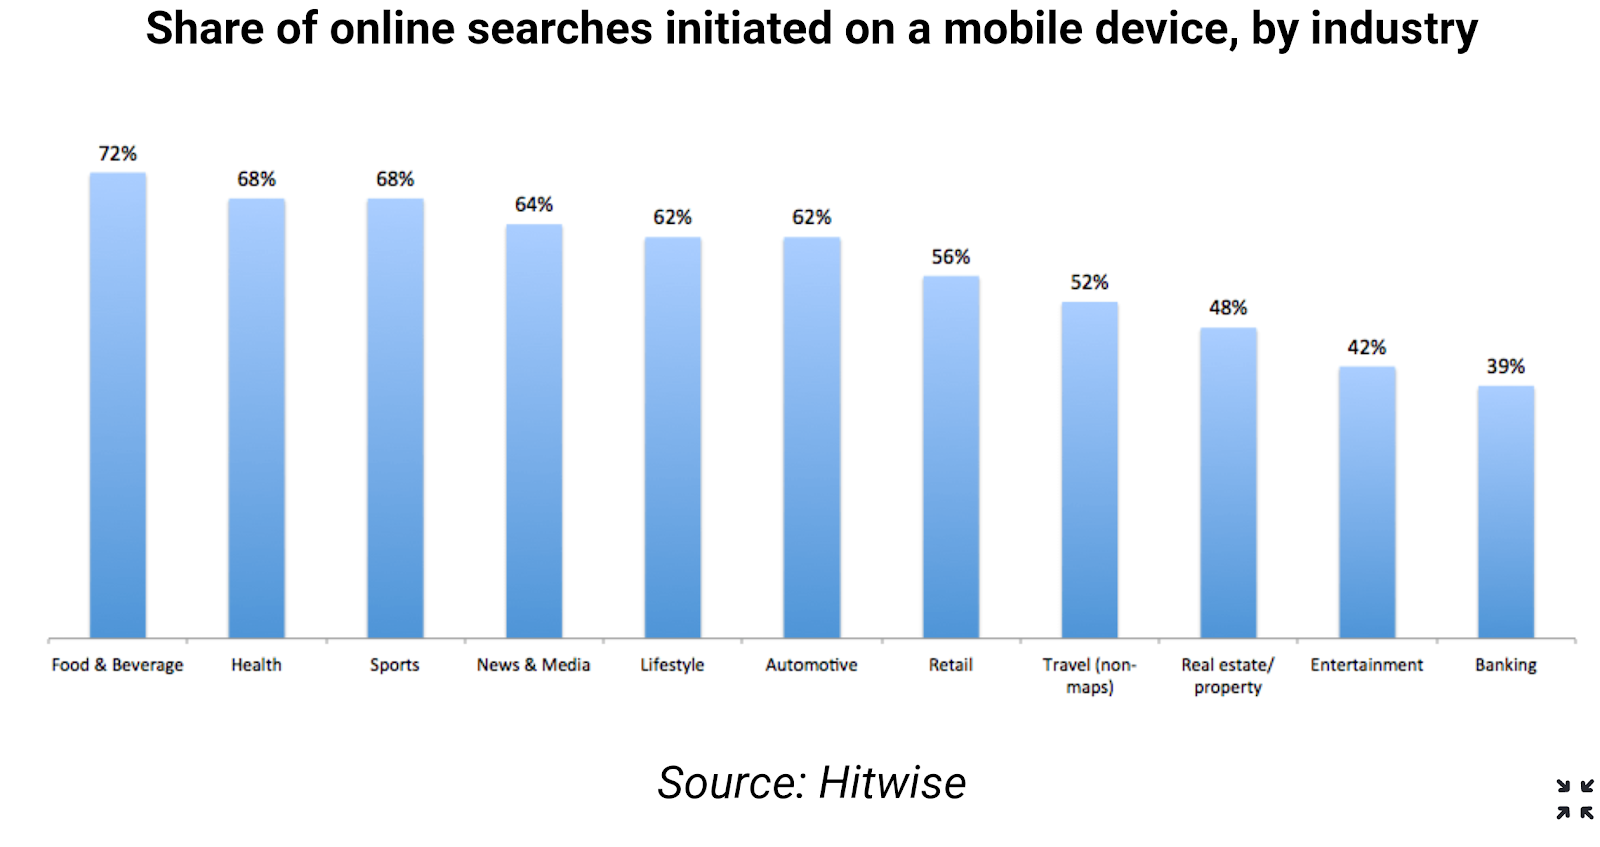 More online searches are being conducted on mobile devices